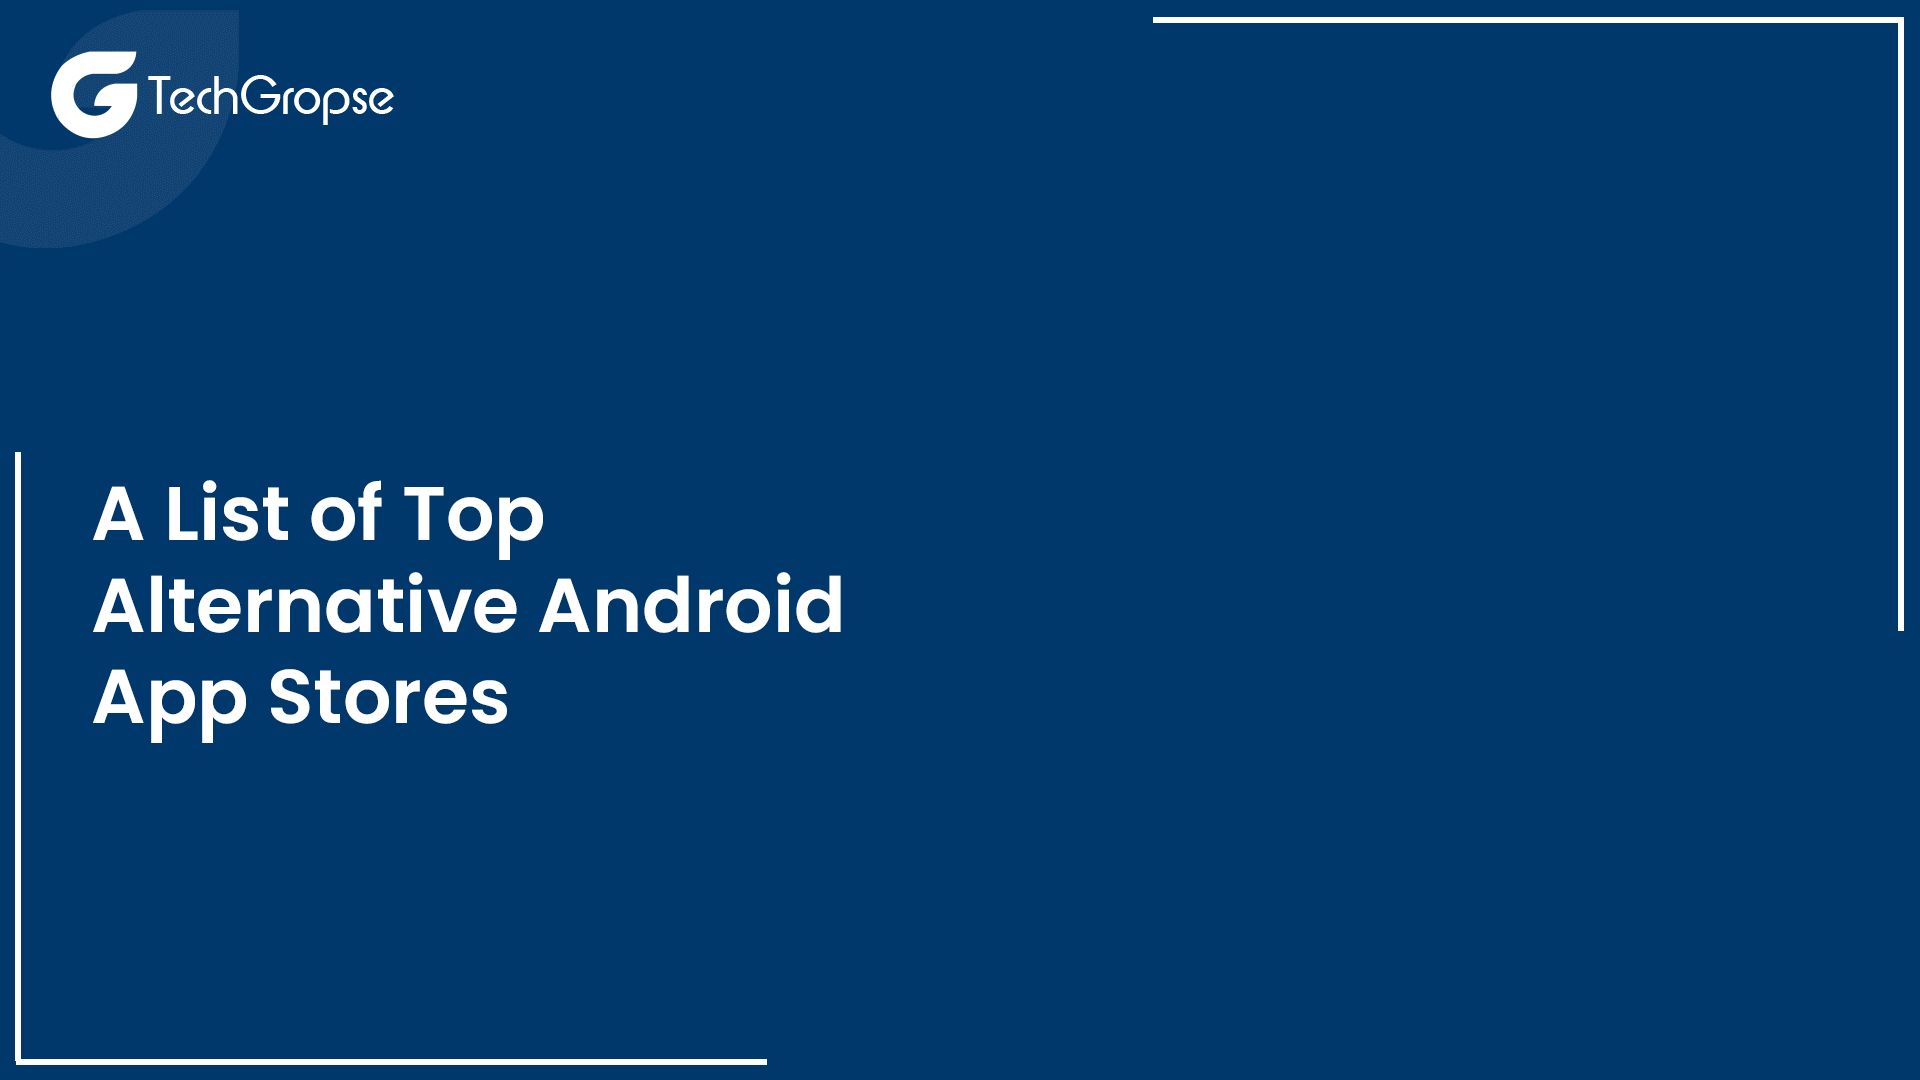 A List of Top Alternative Android App Stores